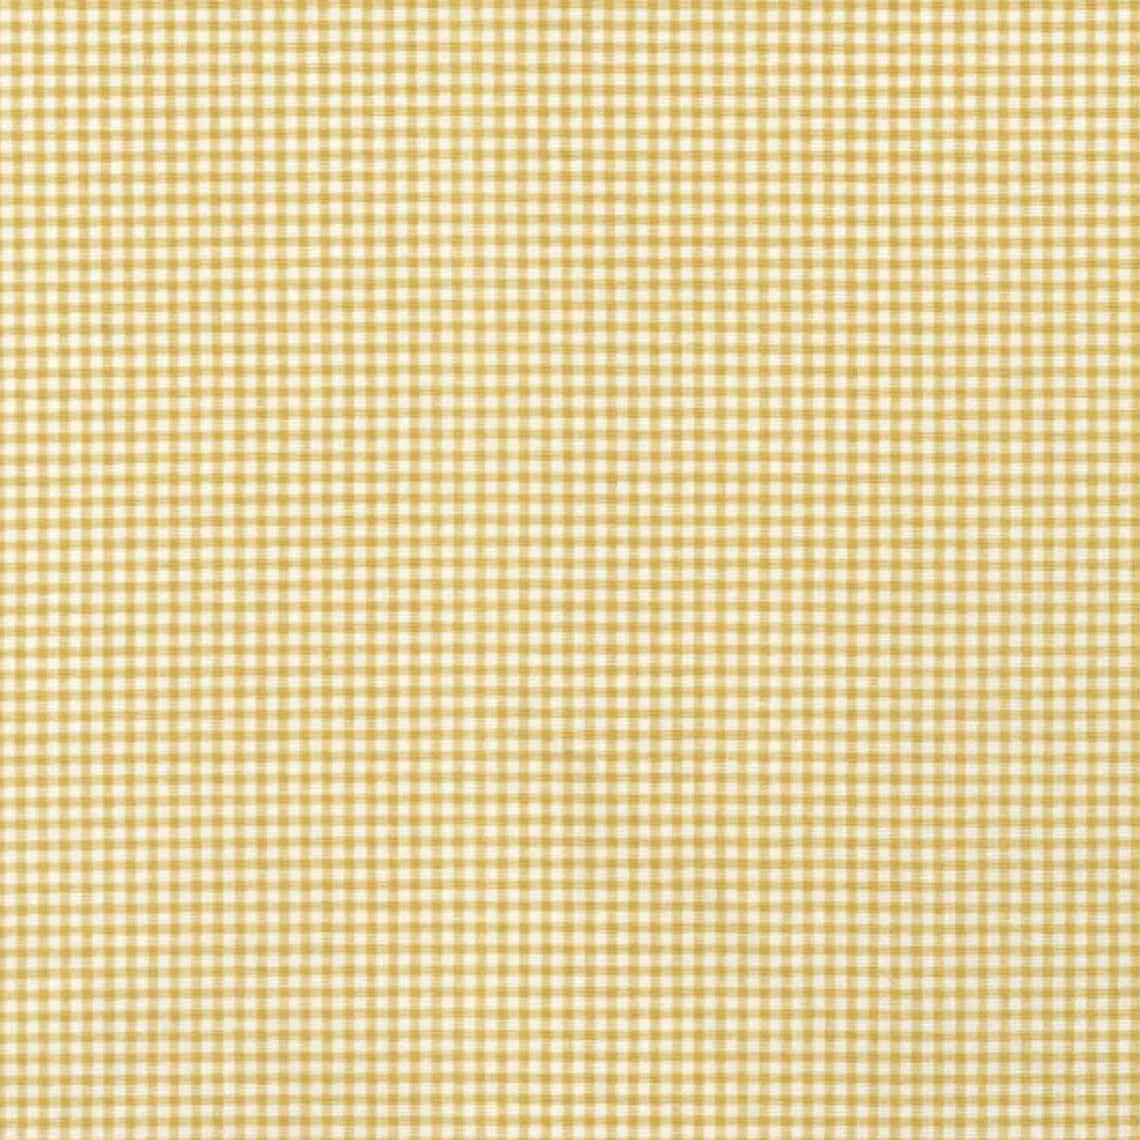 tab top curtain panels pair in farmhouse barley yellow gold gingham check